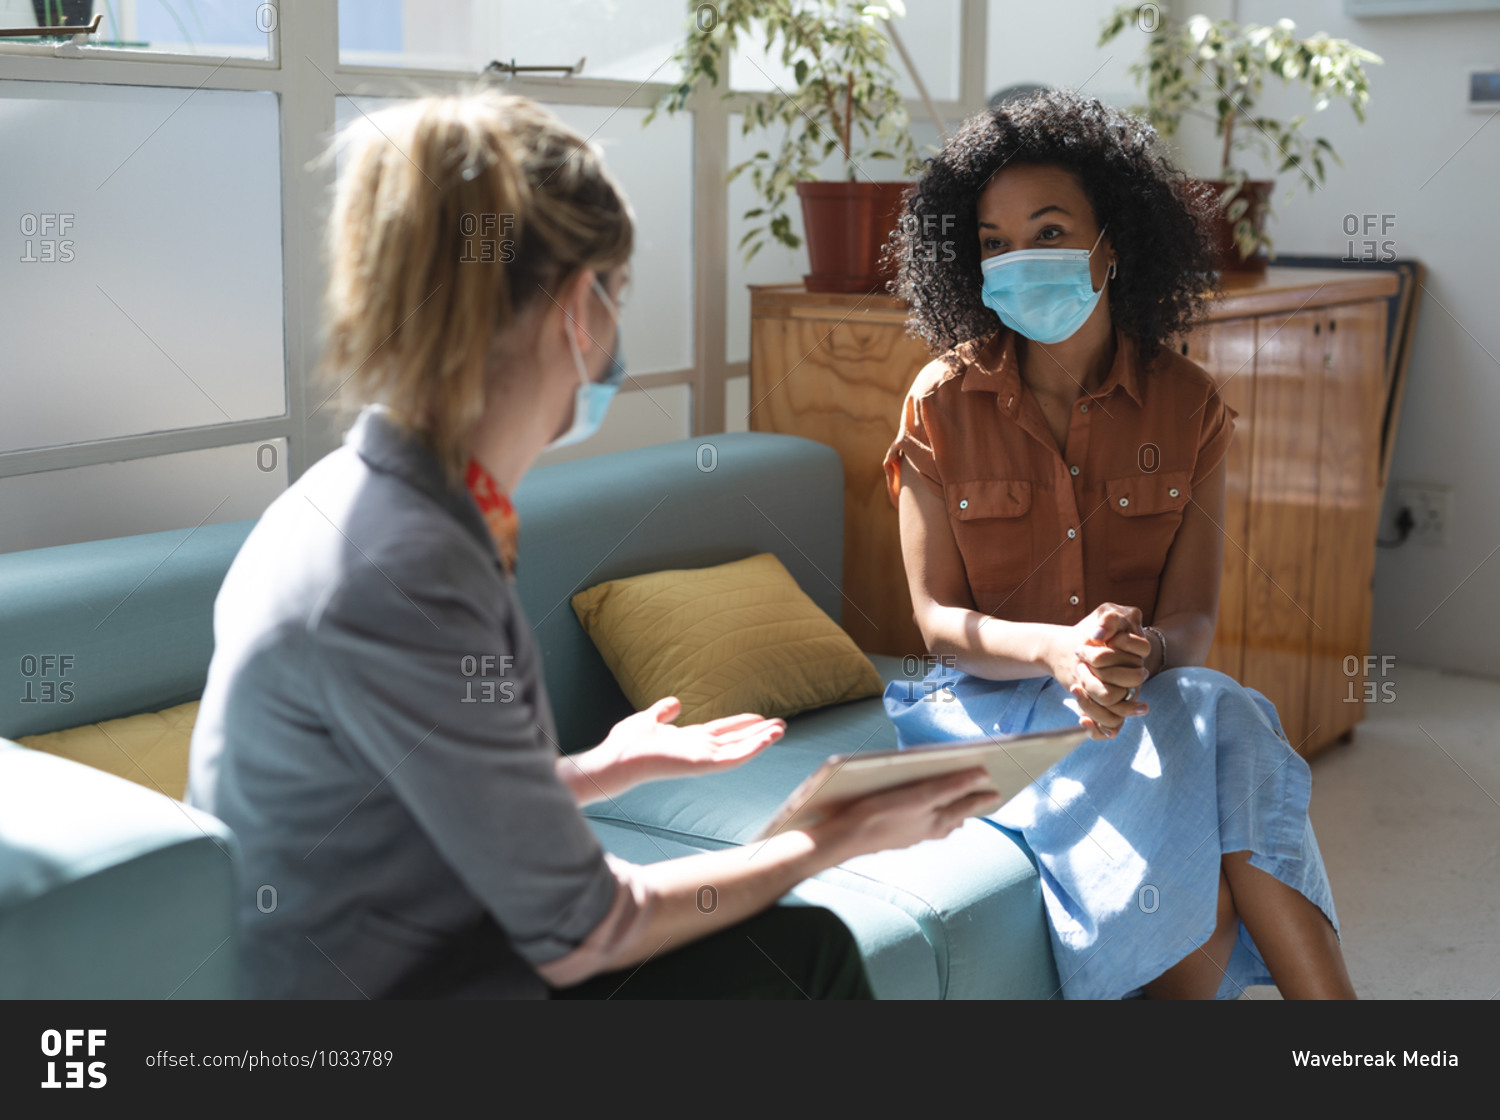 Mixed race and Caucasian female business creatives wearing face masks and distancing on sofa, talking and using tablet in office. Health and hygiene in workplace during Coronavirus Covid 19 pandemic.